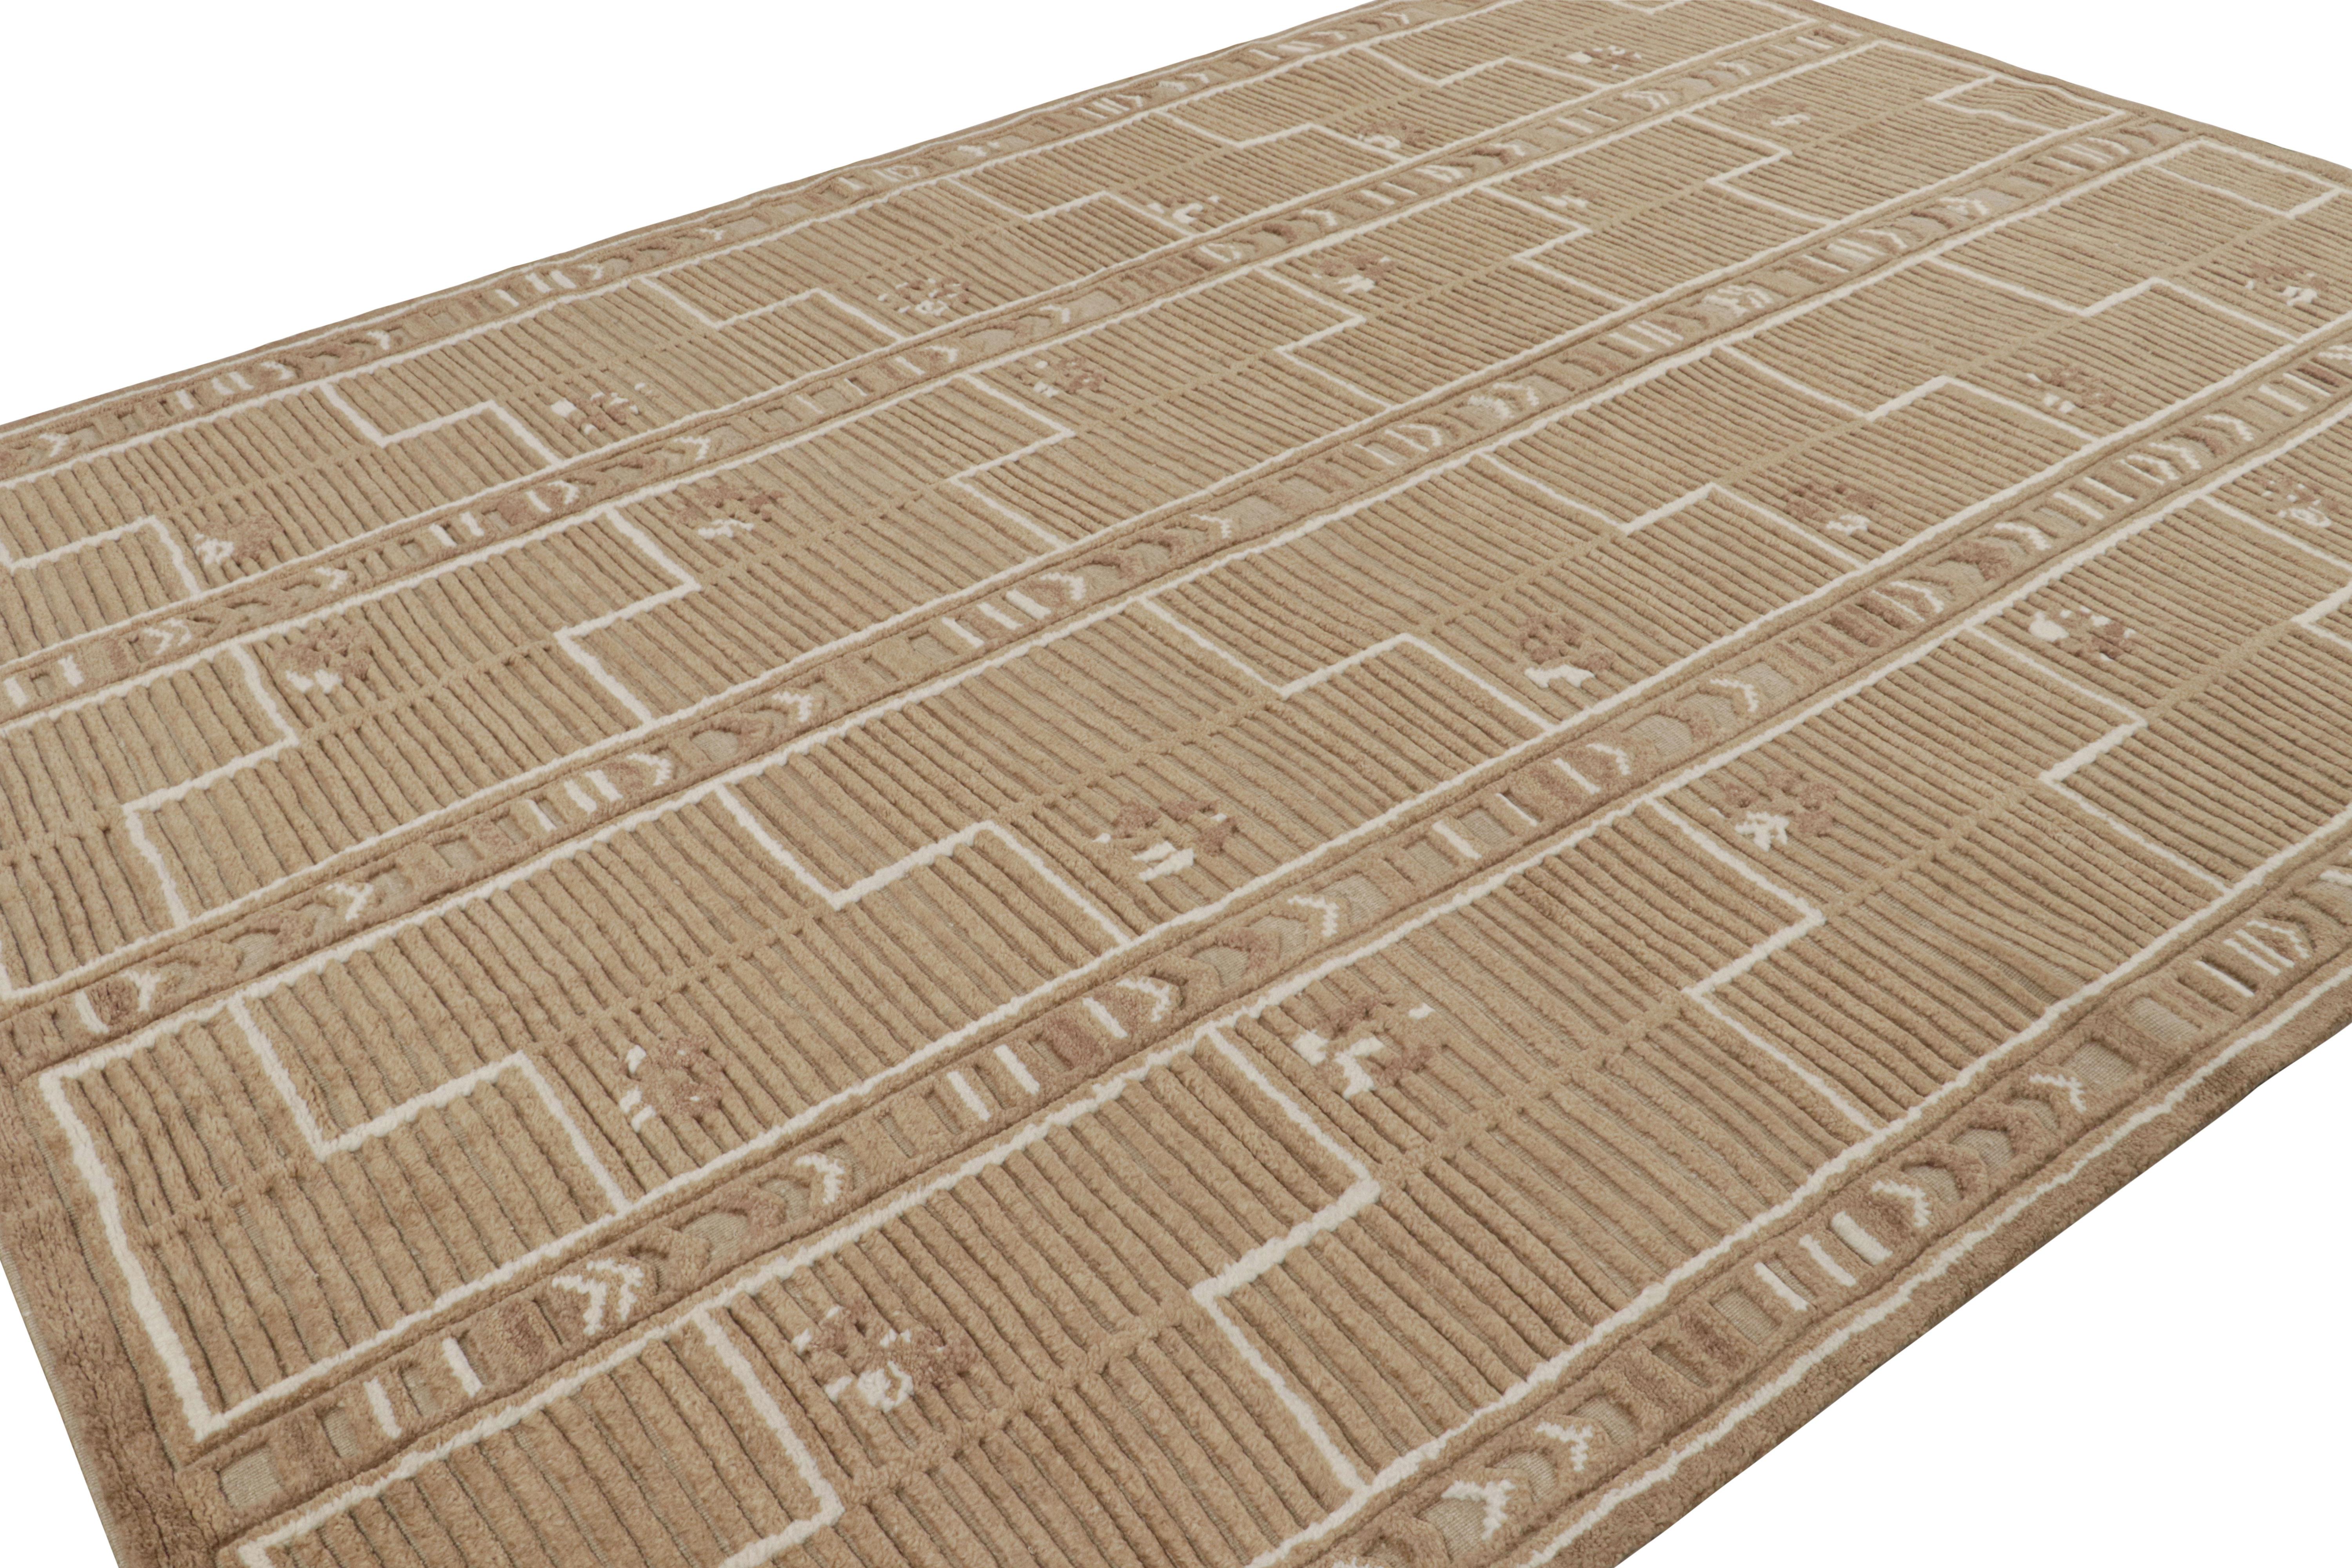 Hand-knotted in wool, this 9x12 Scandinavian rug is from our “High” line, named for its high-low texture married to the geometric patterns inspired by Swedish minimalist aesthetics. 

On the design: 

In this particular rug, beige-brown, taupe and